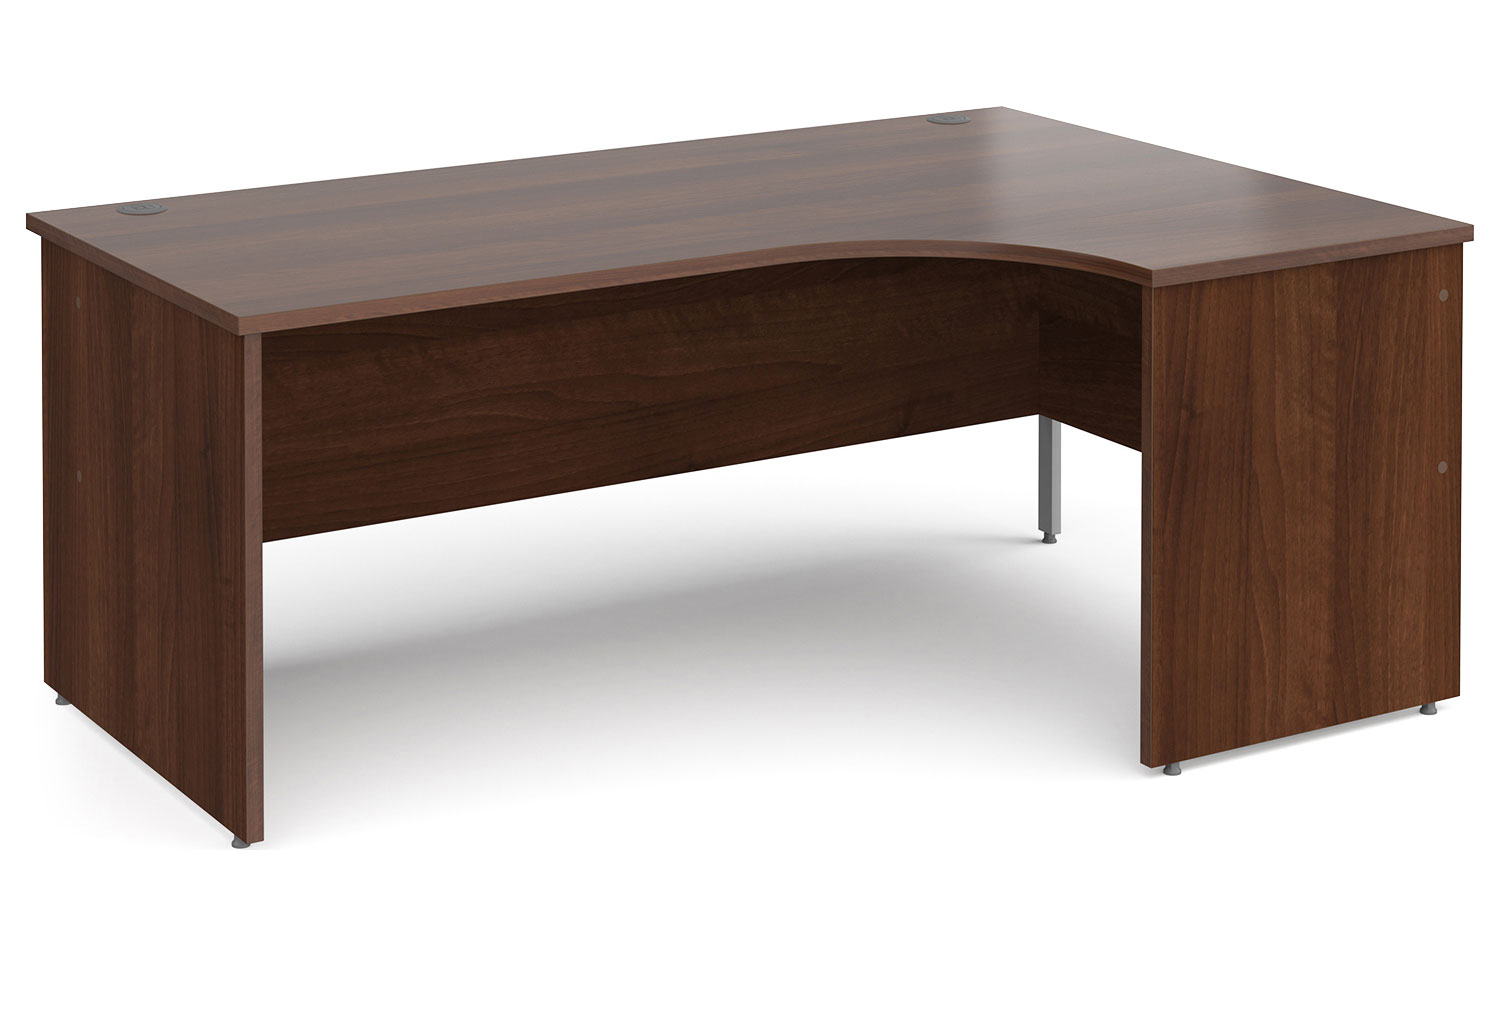 Tully Panel End Right Hand Ergonomic Office Desk, 180wx120/80dx73h (cm), Walnut, Fully Installed